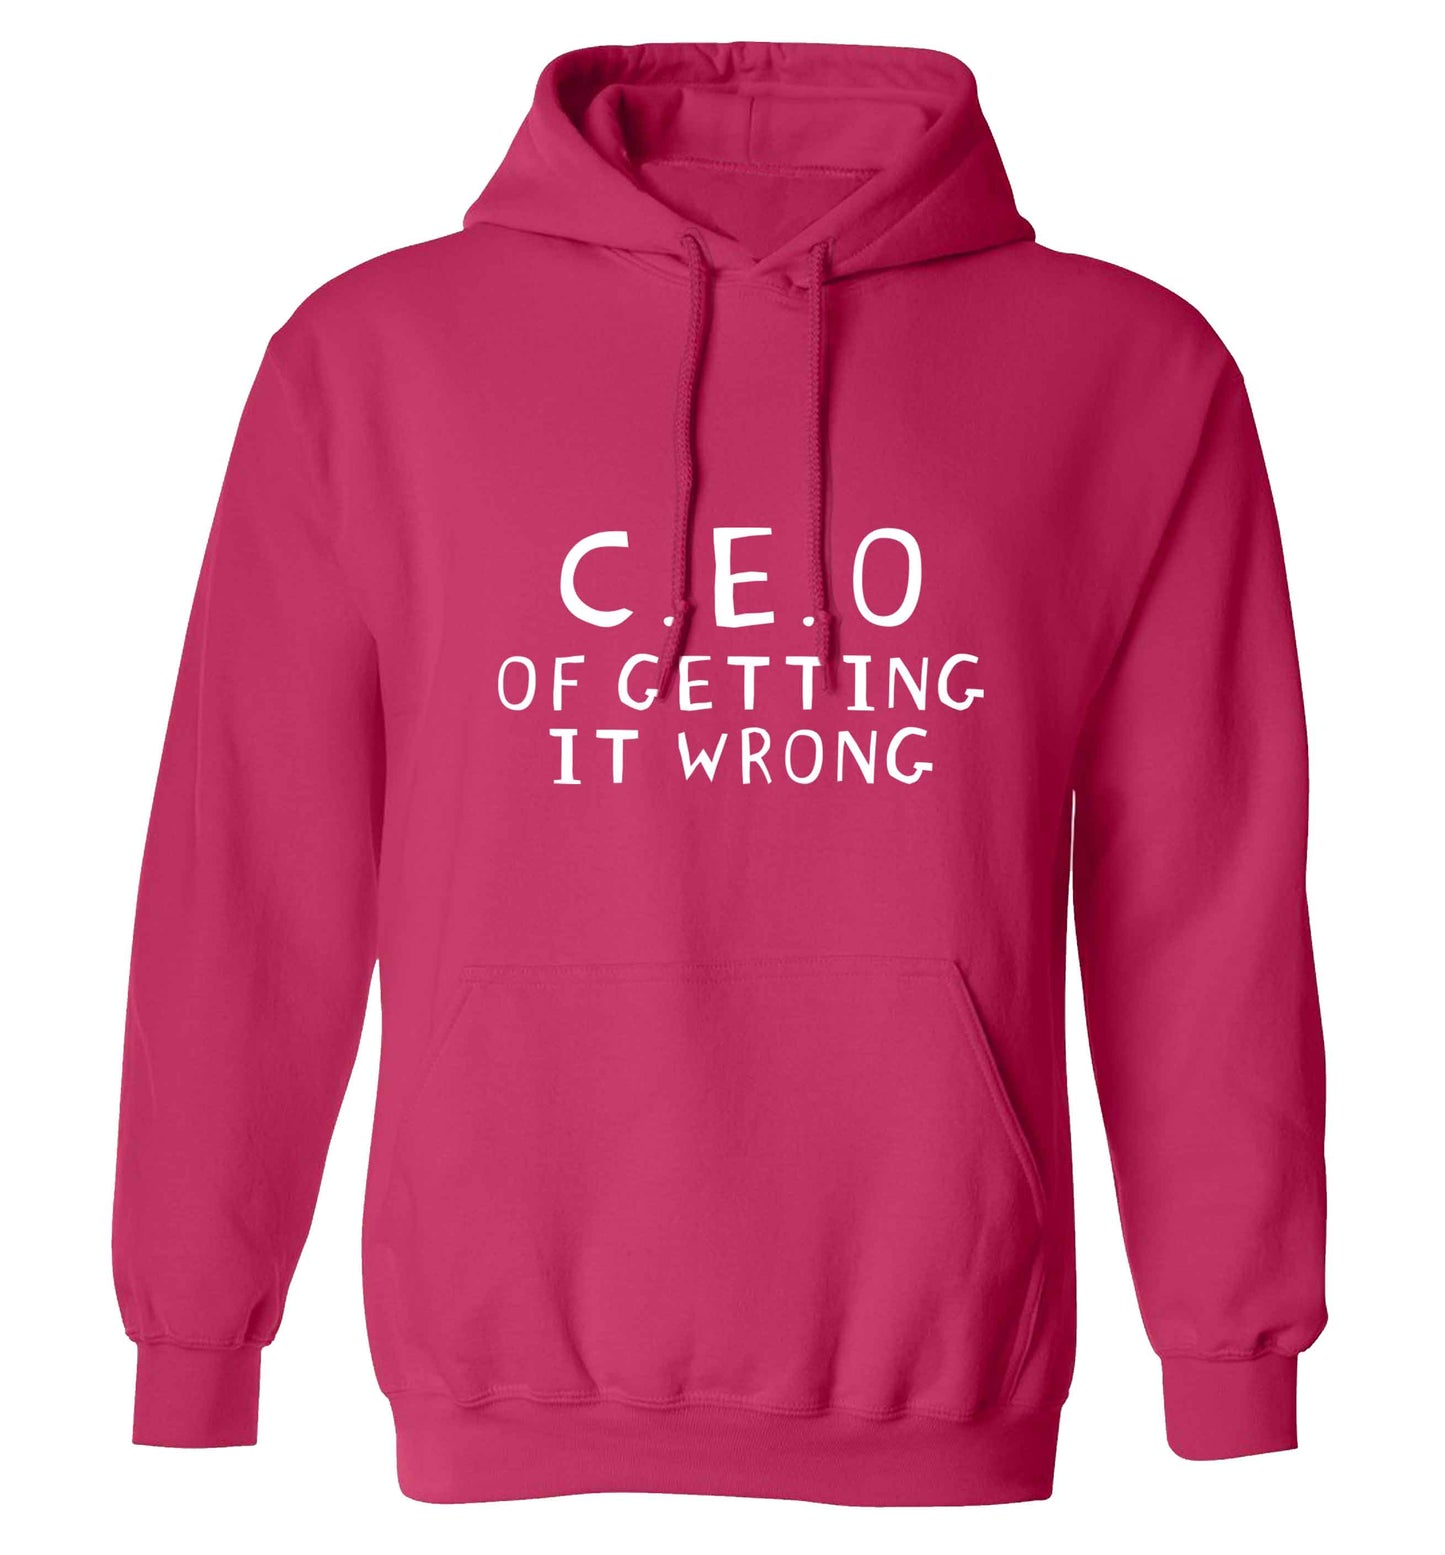 We love this for YOU! Who else loves saying this?!  adults unisex pink hoodie 2XL